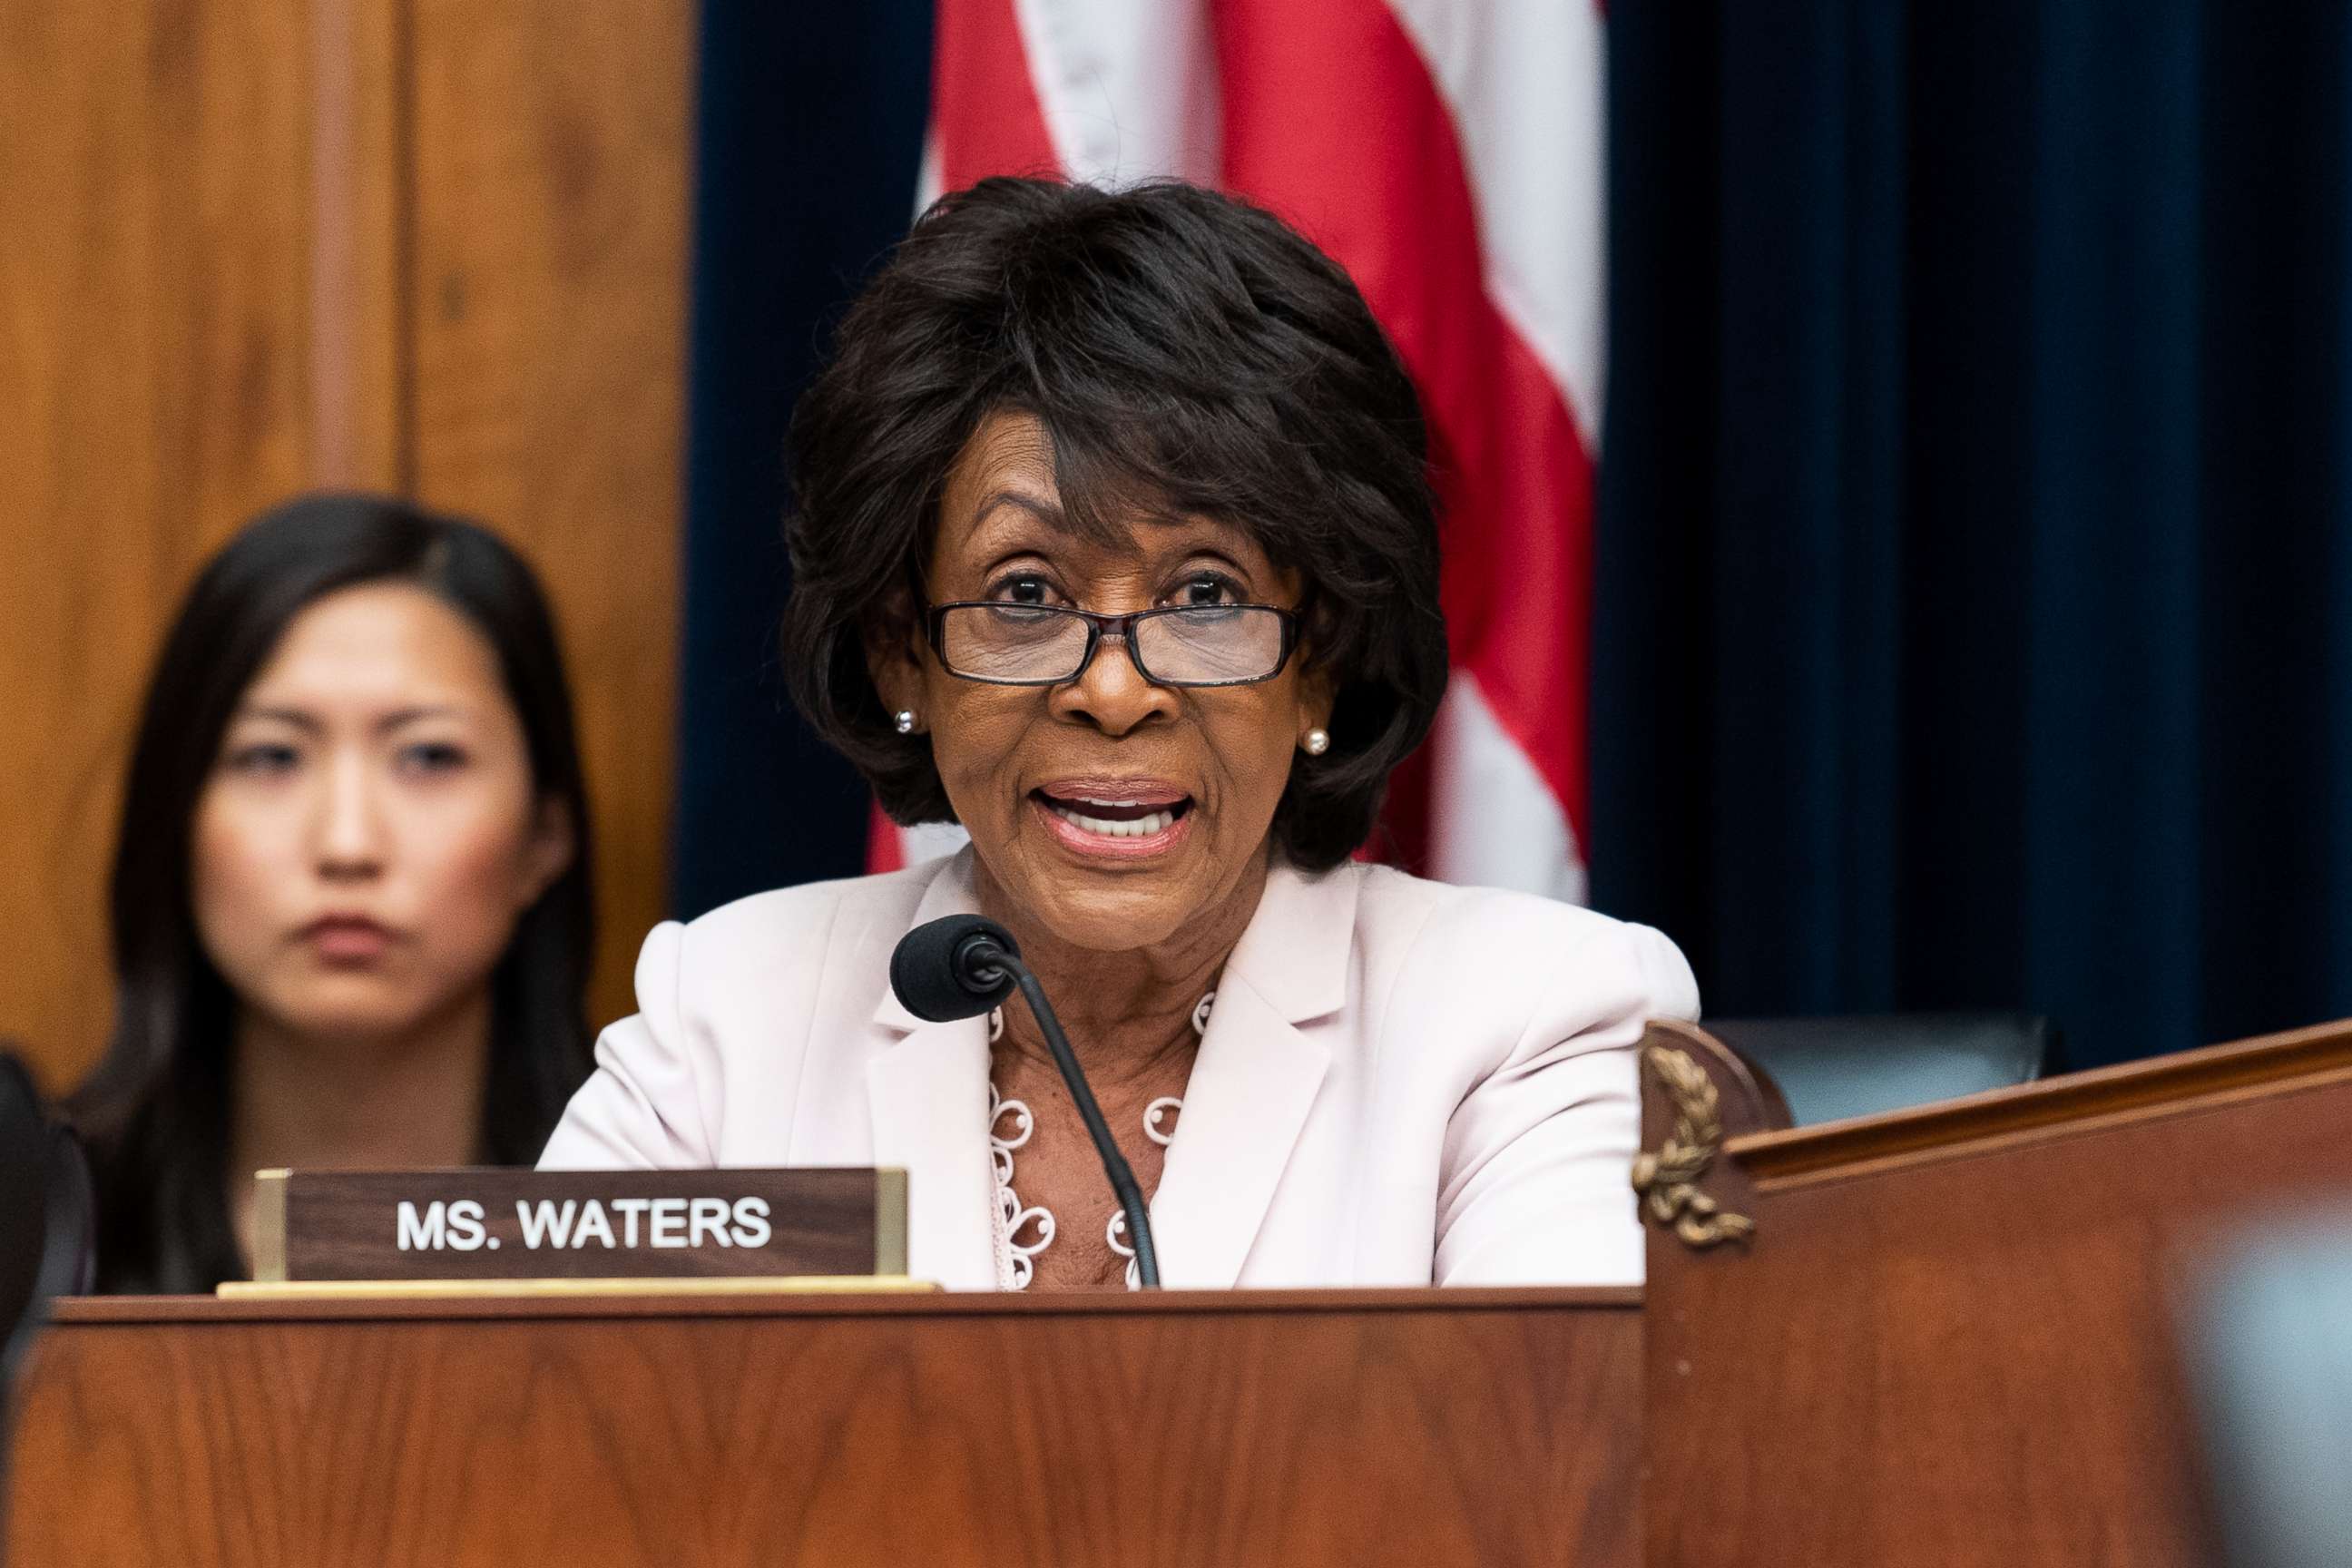 PHOTO: Rep. Maxine Waters, D-CA, at a hearing of the House Financial Services Committee in the Rayburn building on June 27, 2018, in Washington, D.C.